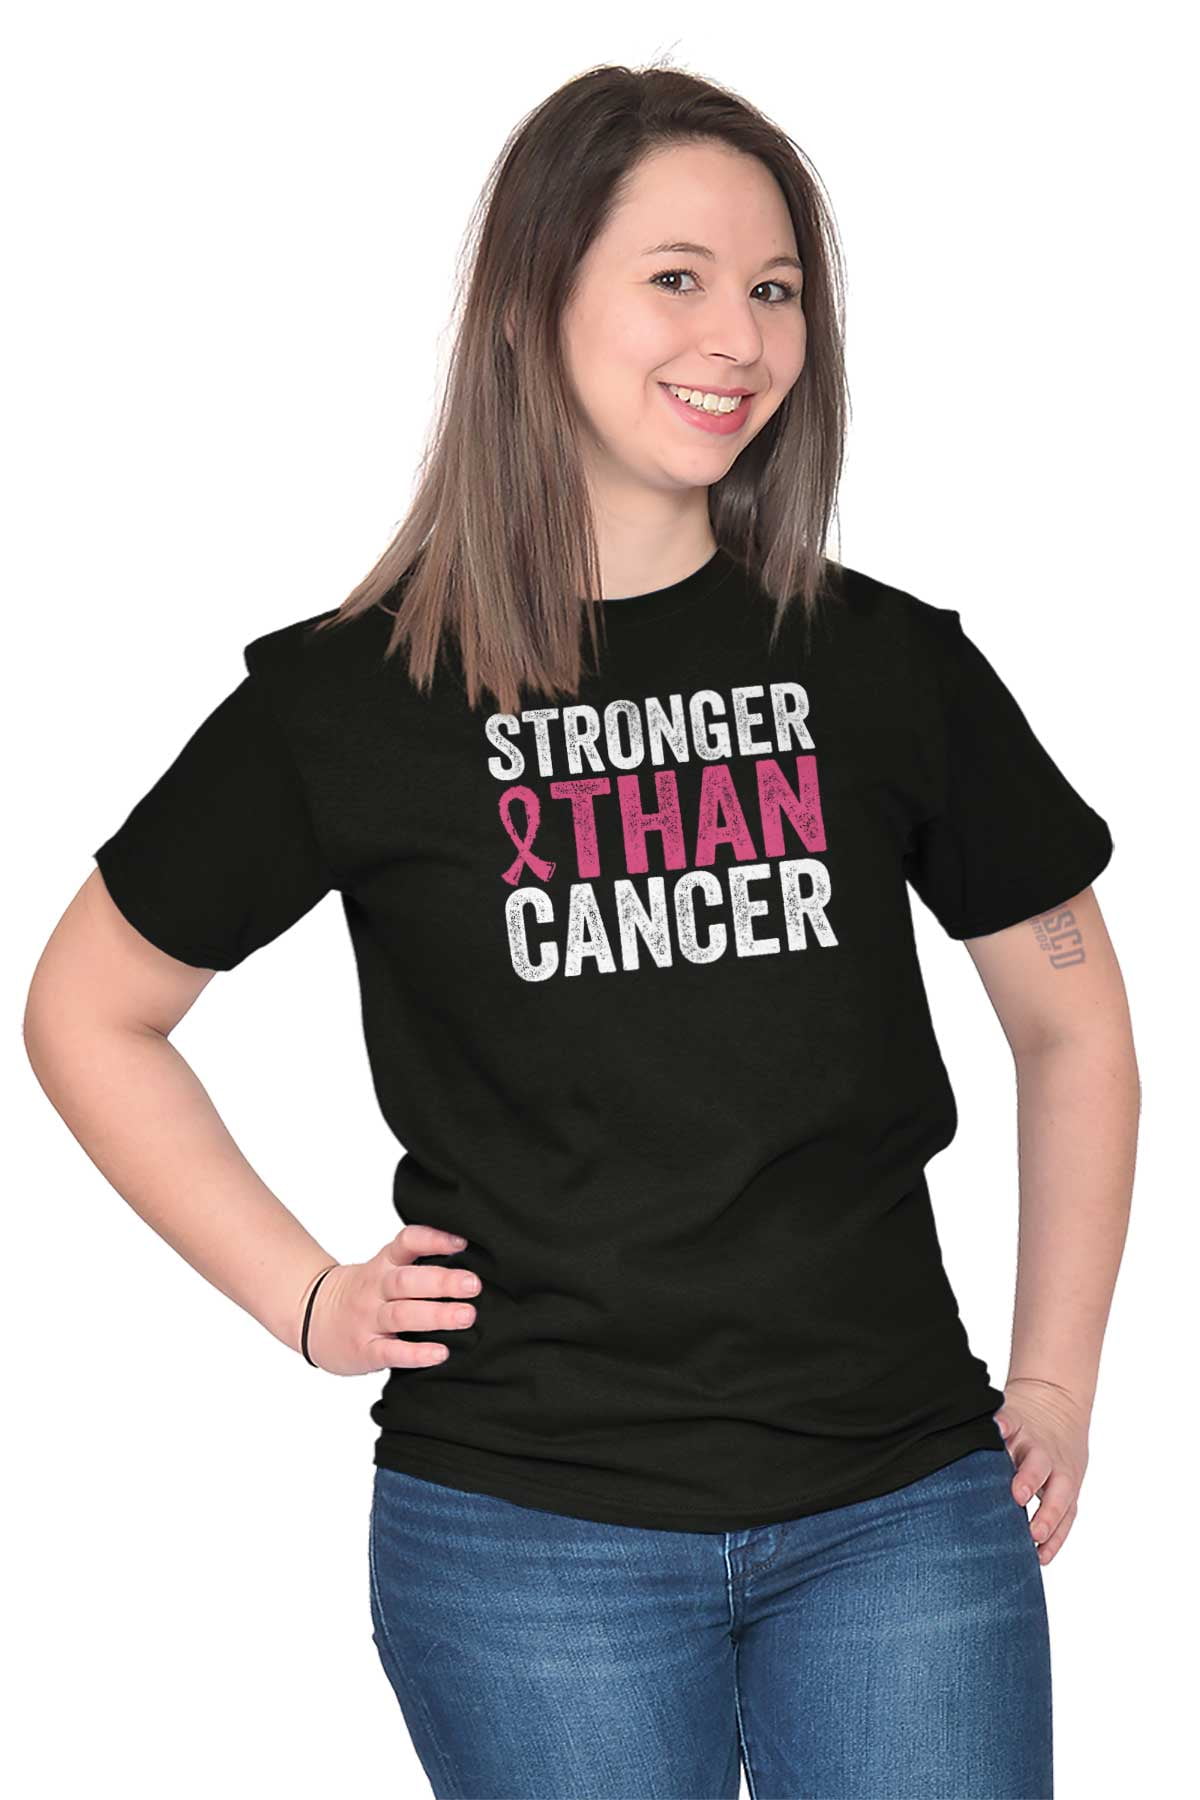 Breast Cancer Awareness Ladies Tshirts Tees T For Women Stronger Than Cancer Breast Disease